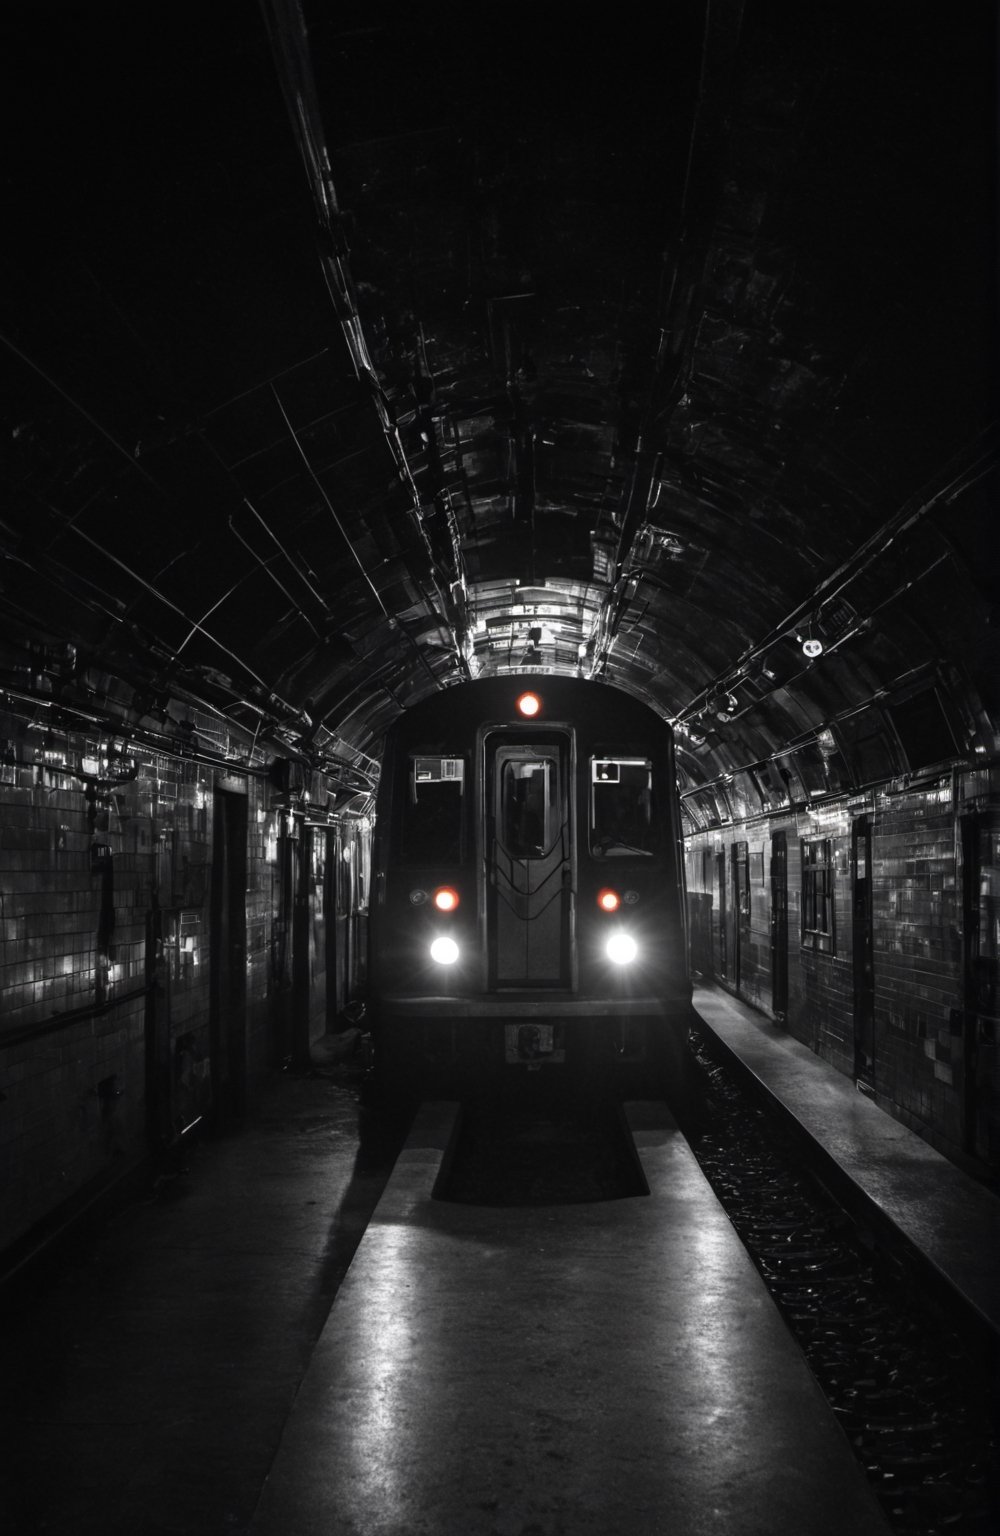 Underground train, dark all around, dreamy atmosphere, contrast, front angle of the subway, you see the train from the outside, style raw.